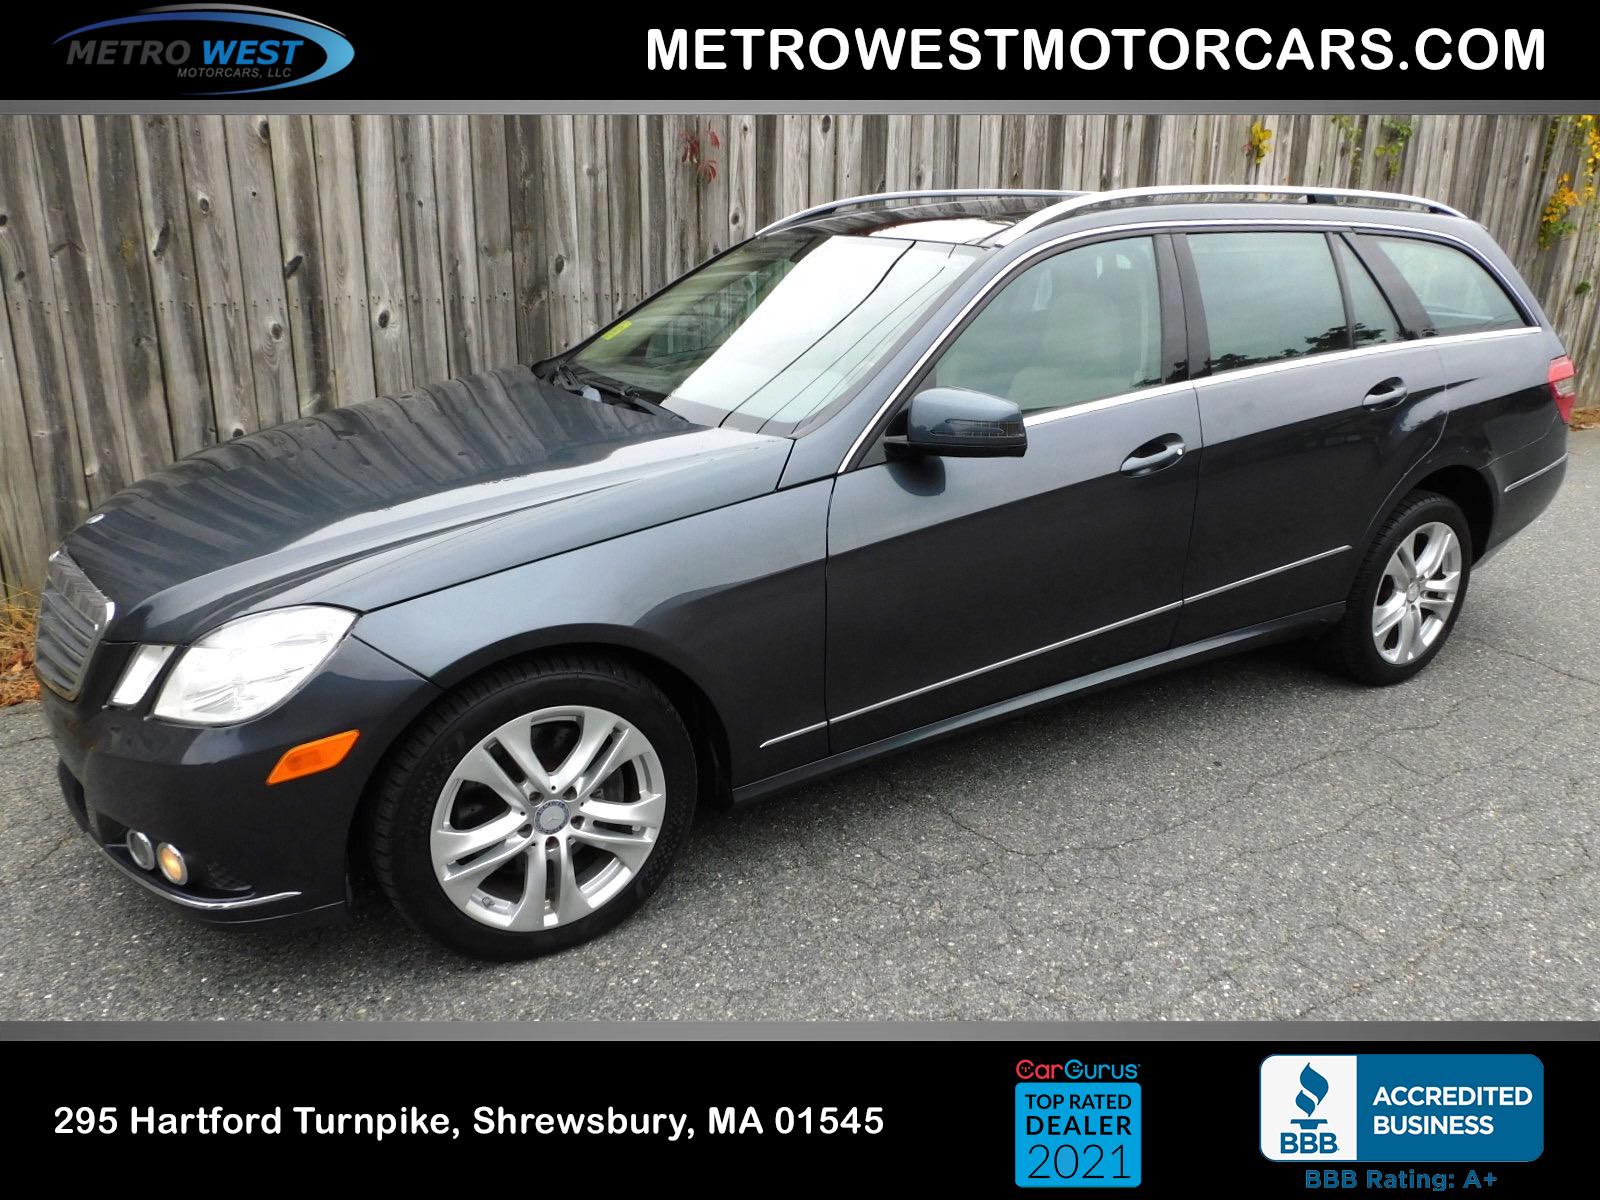 Used 11 Mercedes Benz E Class 50 Wagon 4matic For Sale 15 800 Metro West Motorcars Llc Stock